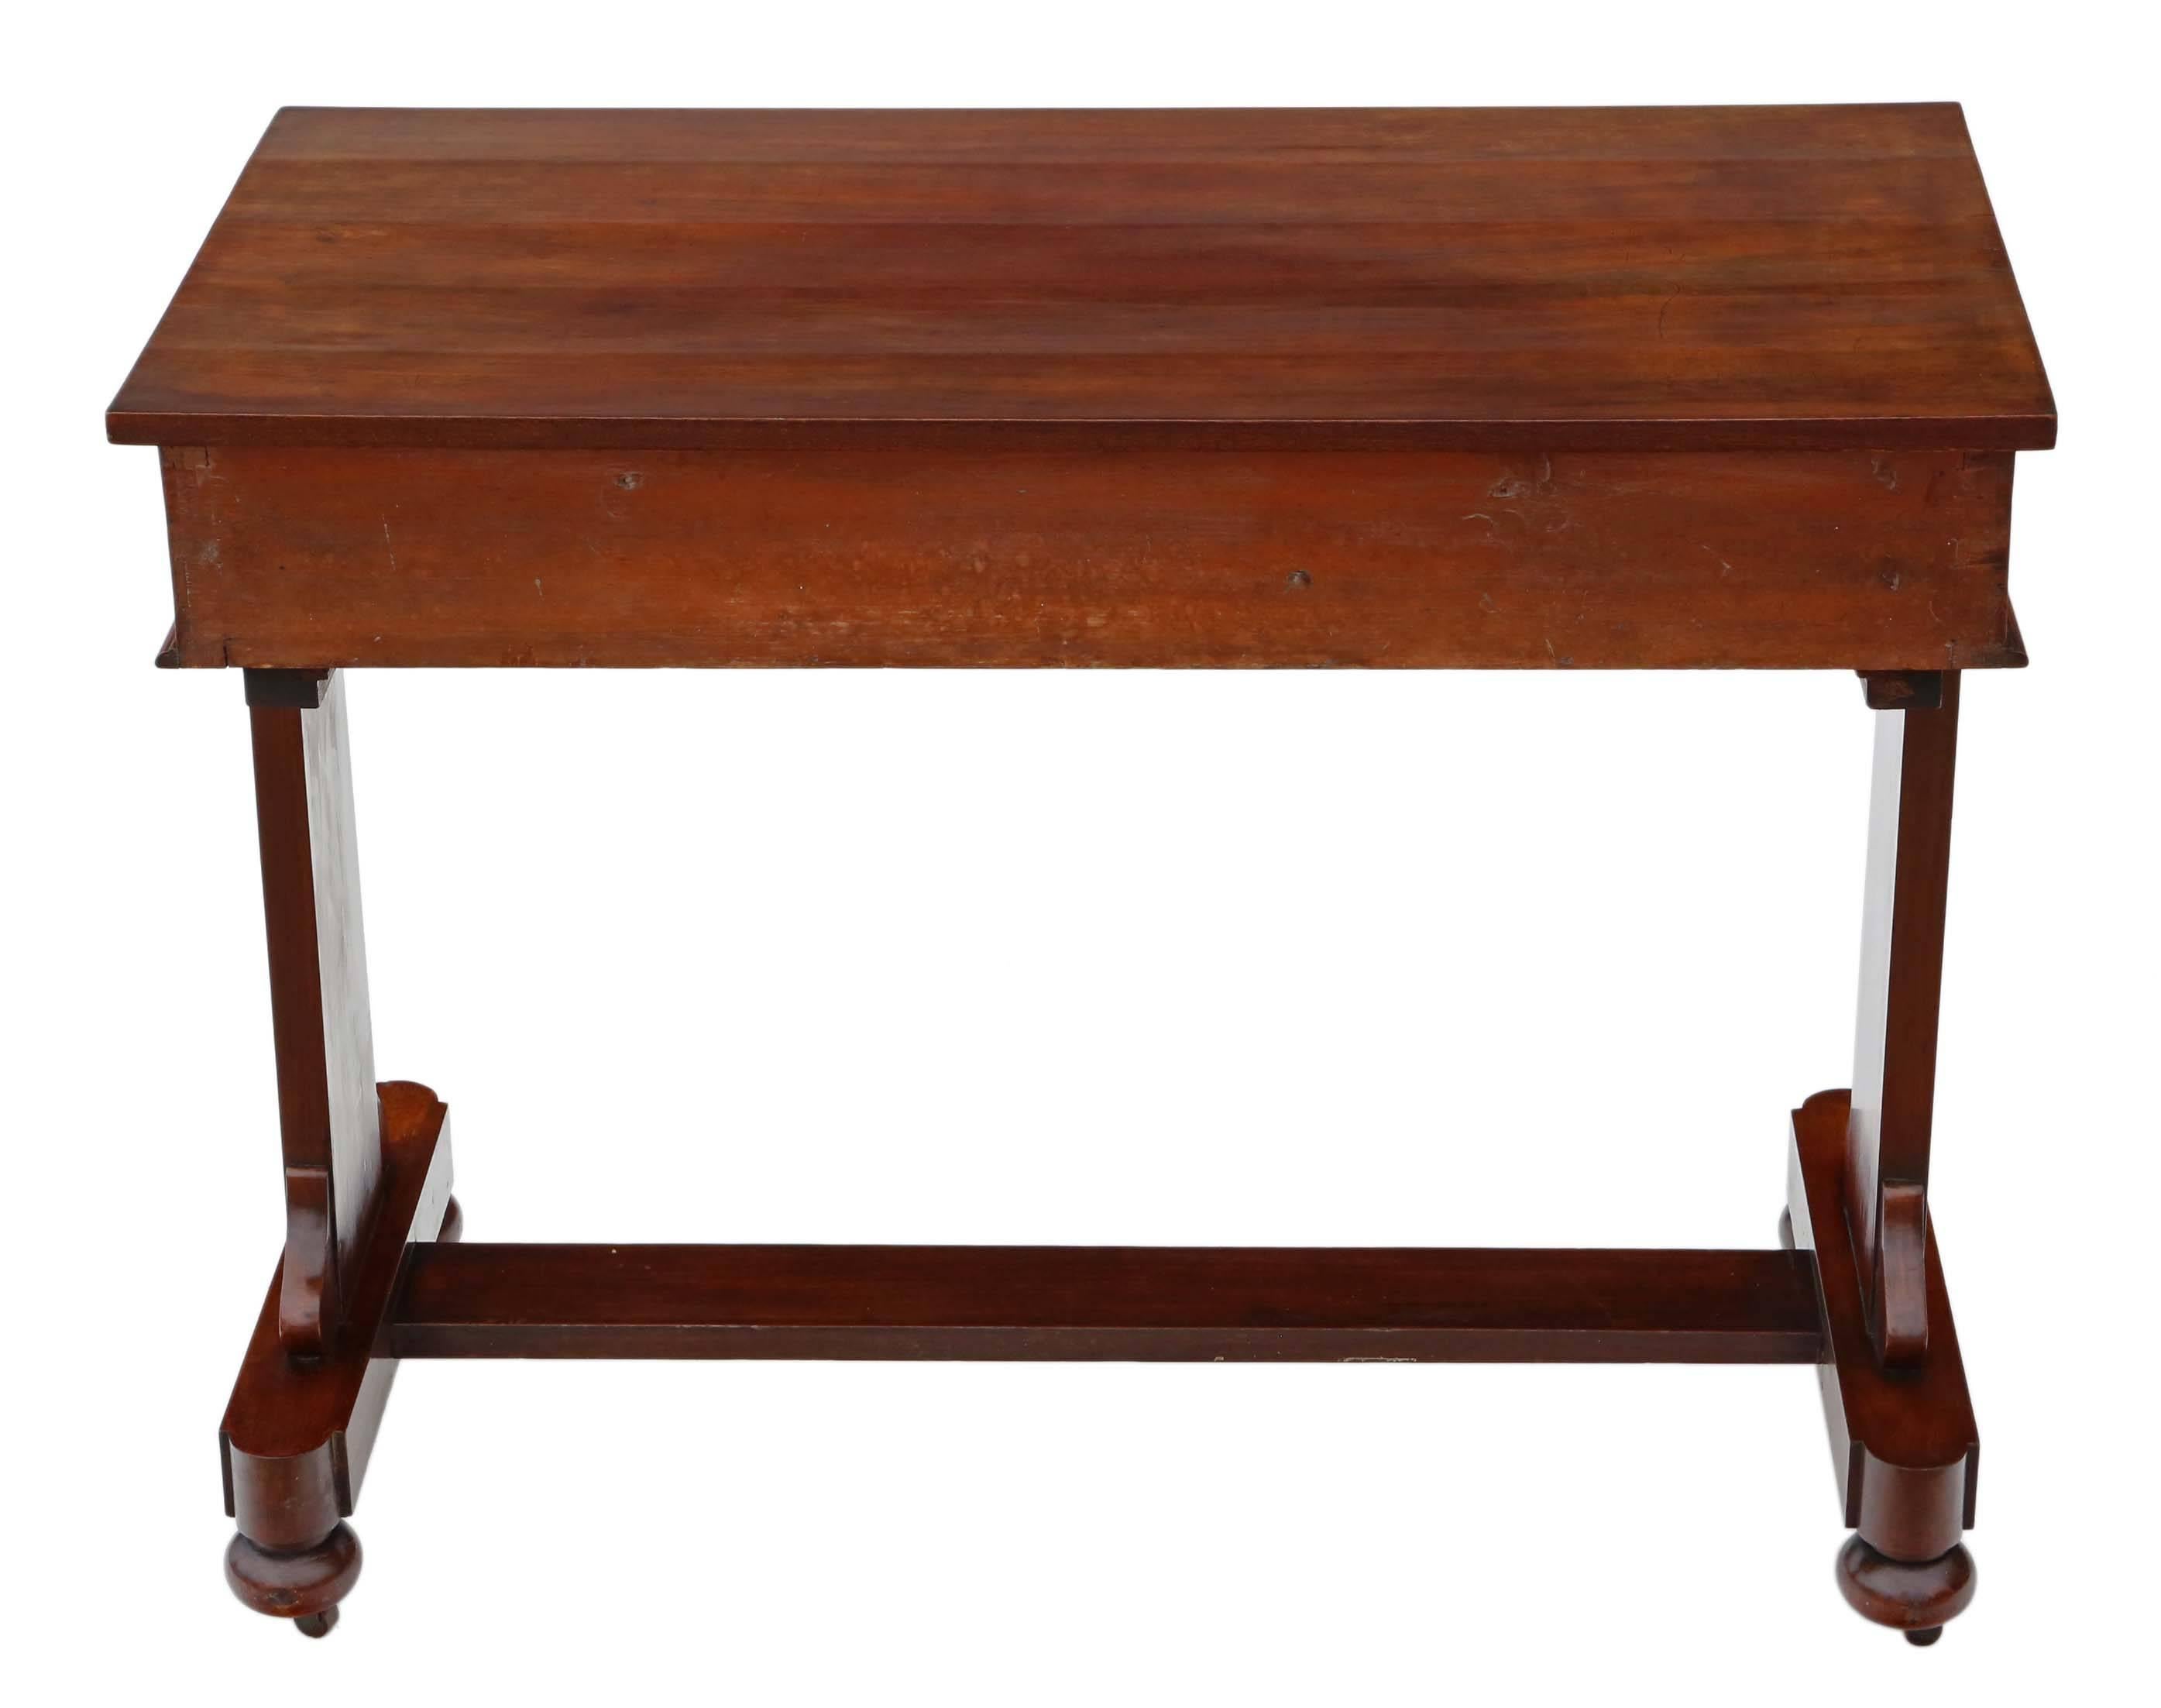 Antique Quality Victorian circa 1860 Mahogany Desk or Writing Table For Sale 2